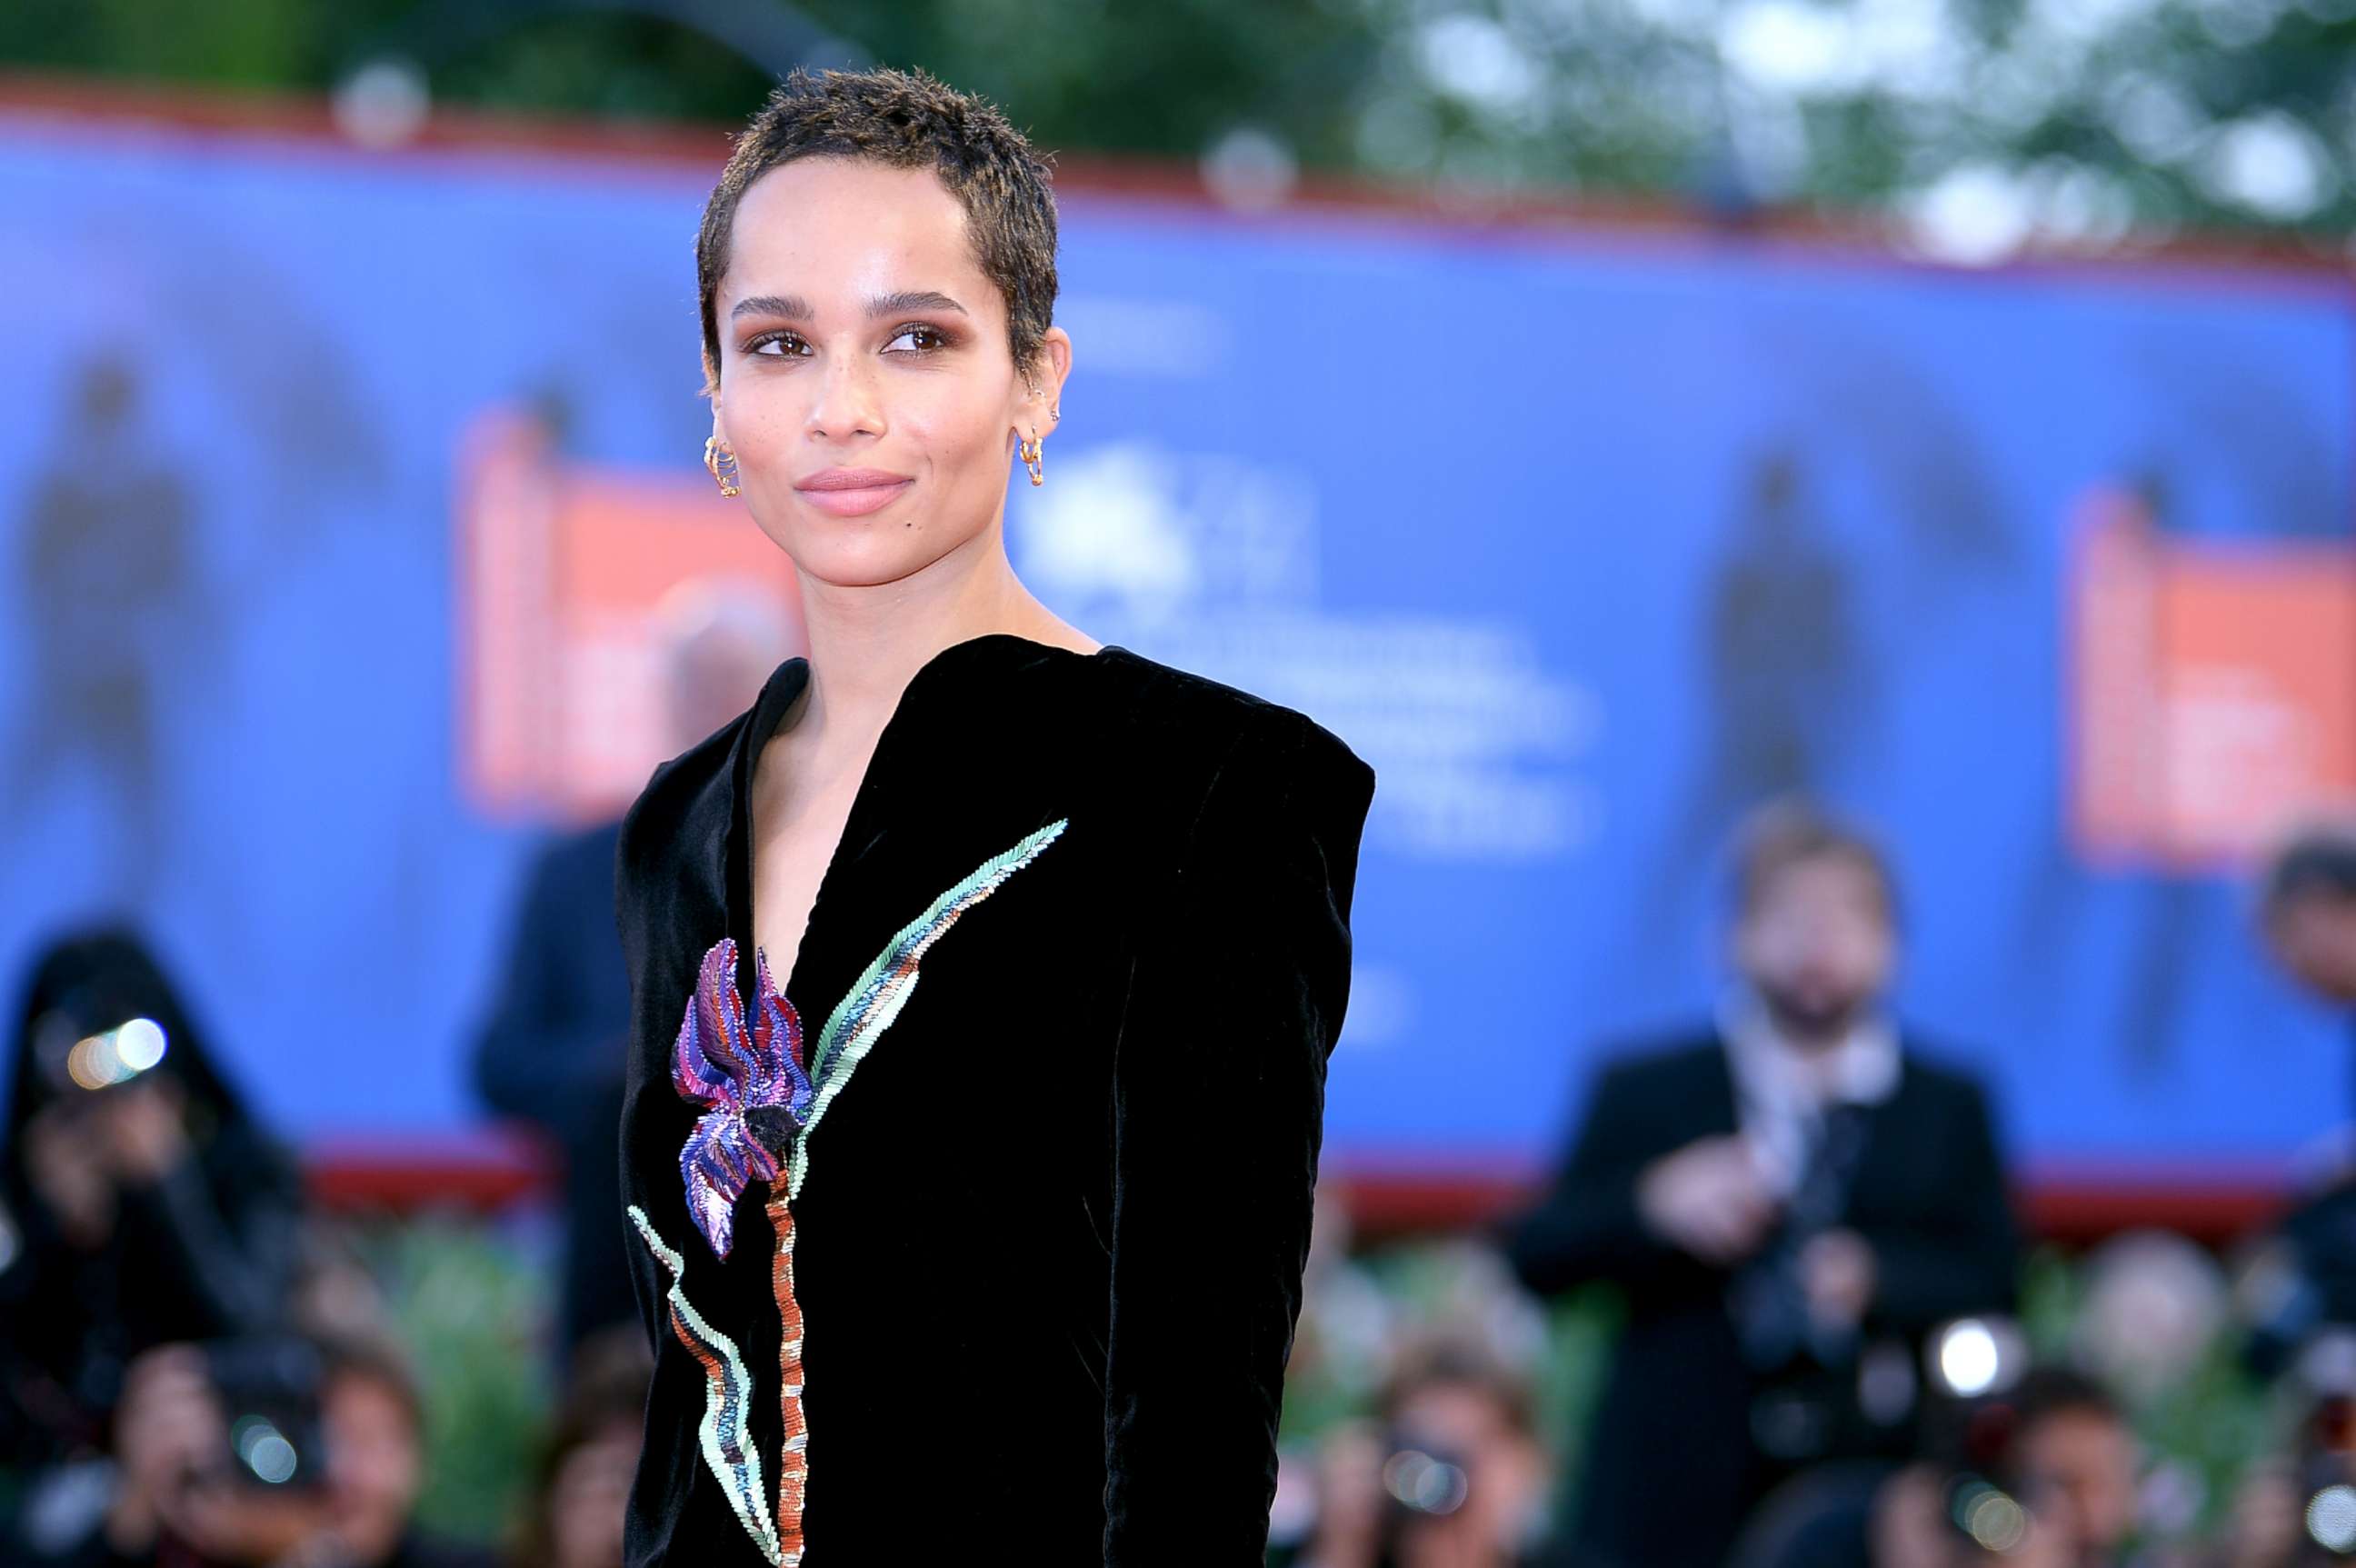 PHOTO: Zoe Kravitz attends the premiere of "Racer And The Jailbird (Le Fidele)" at the 74th Venice Film Festival, Sept. 8, 2017, in Venice, Italy.